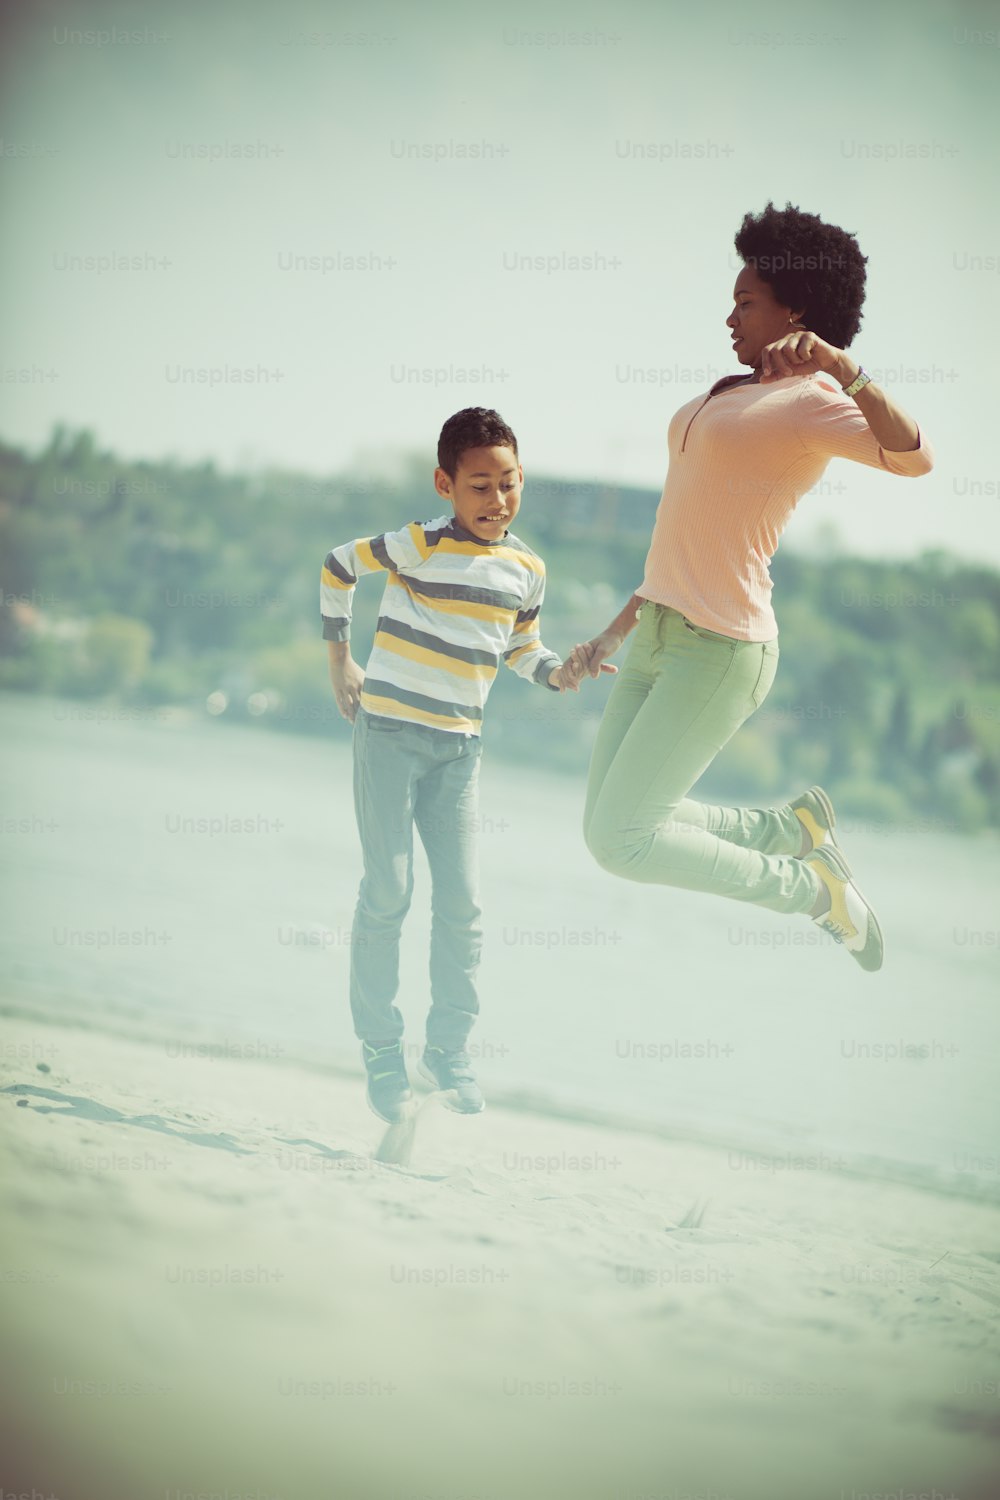 When you're happy, jump high. Mother and son on the beach.